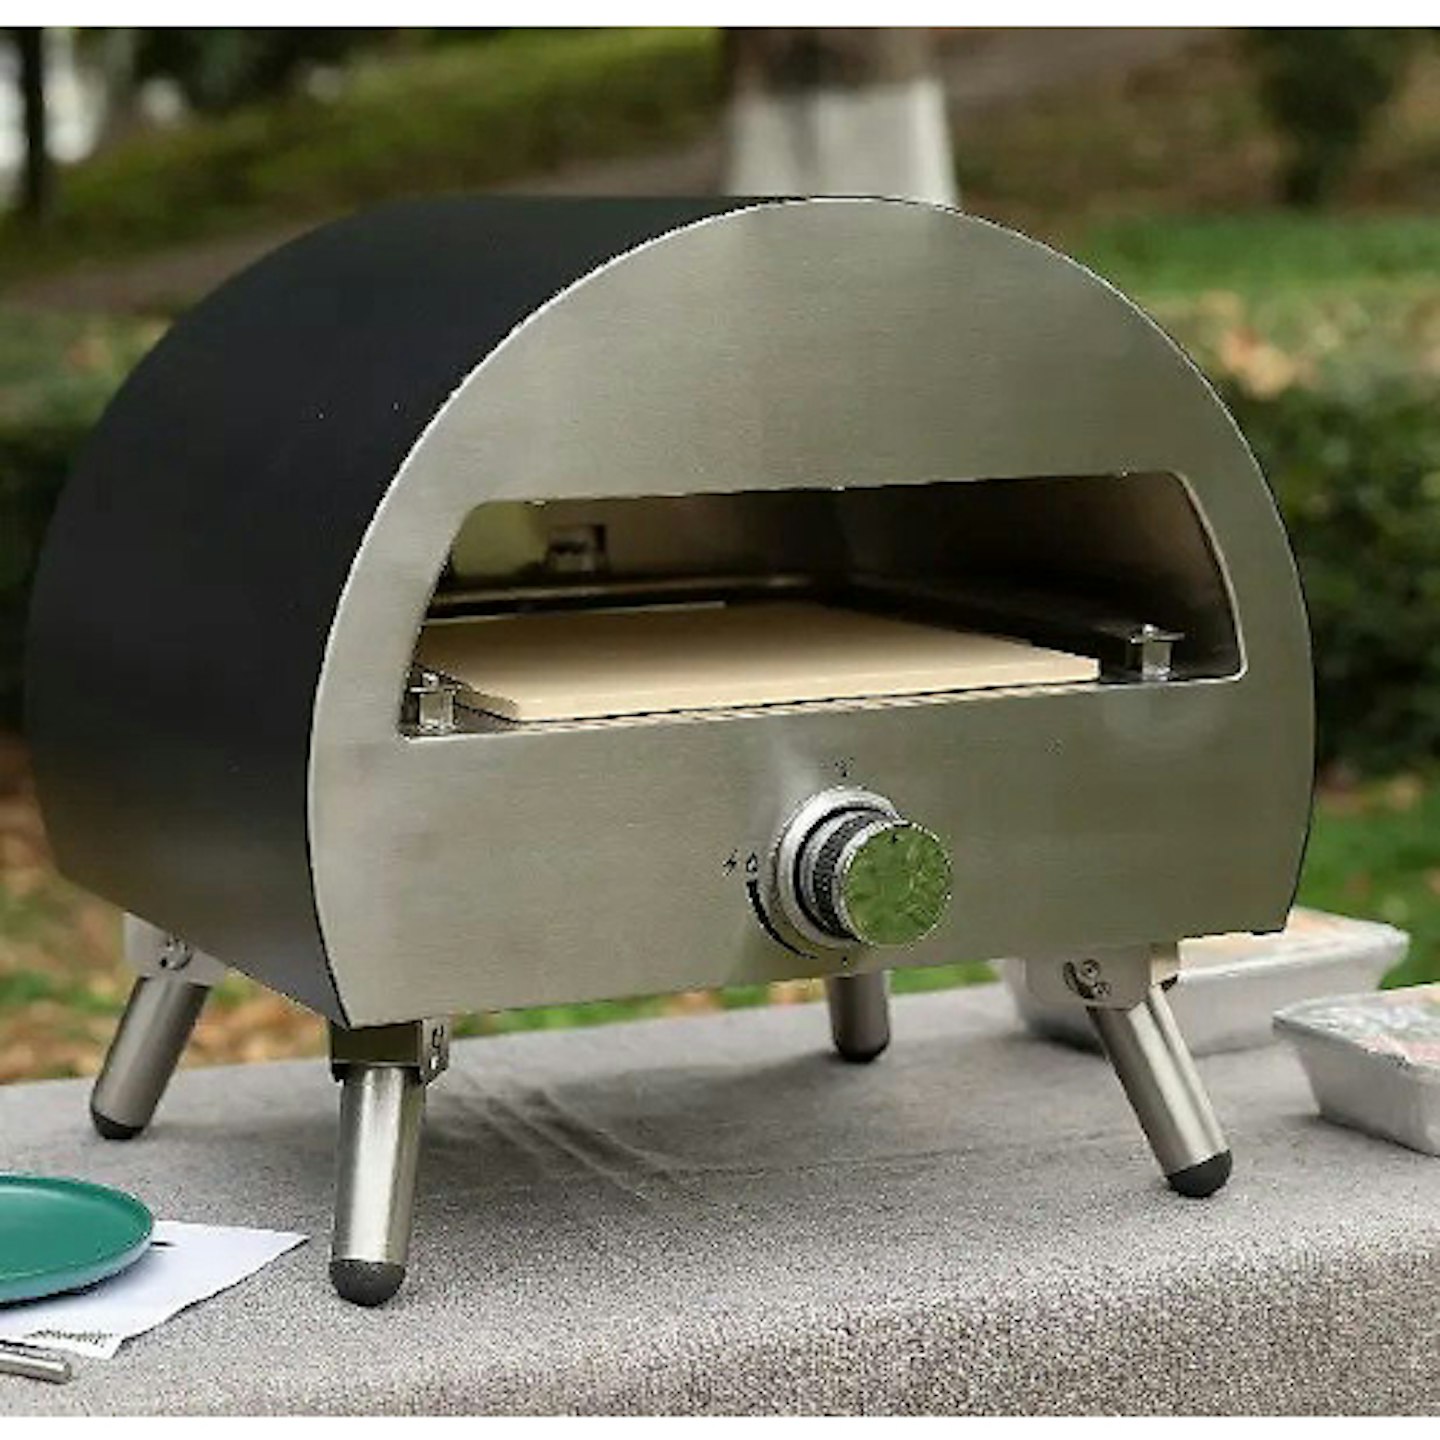 Camping pizza oven